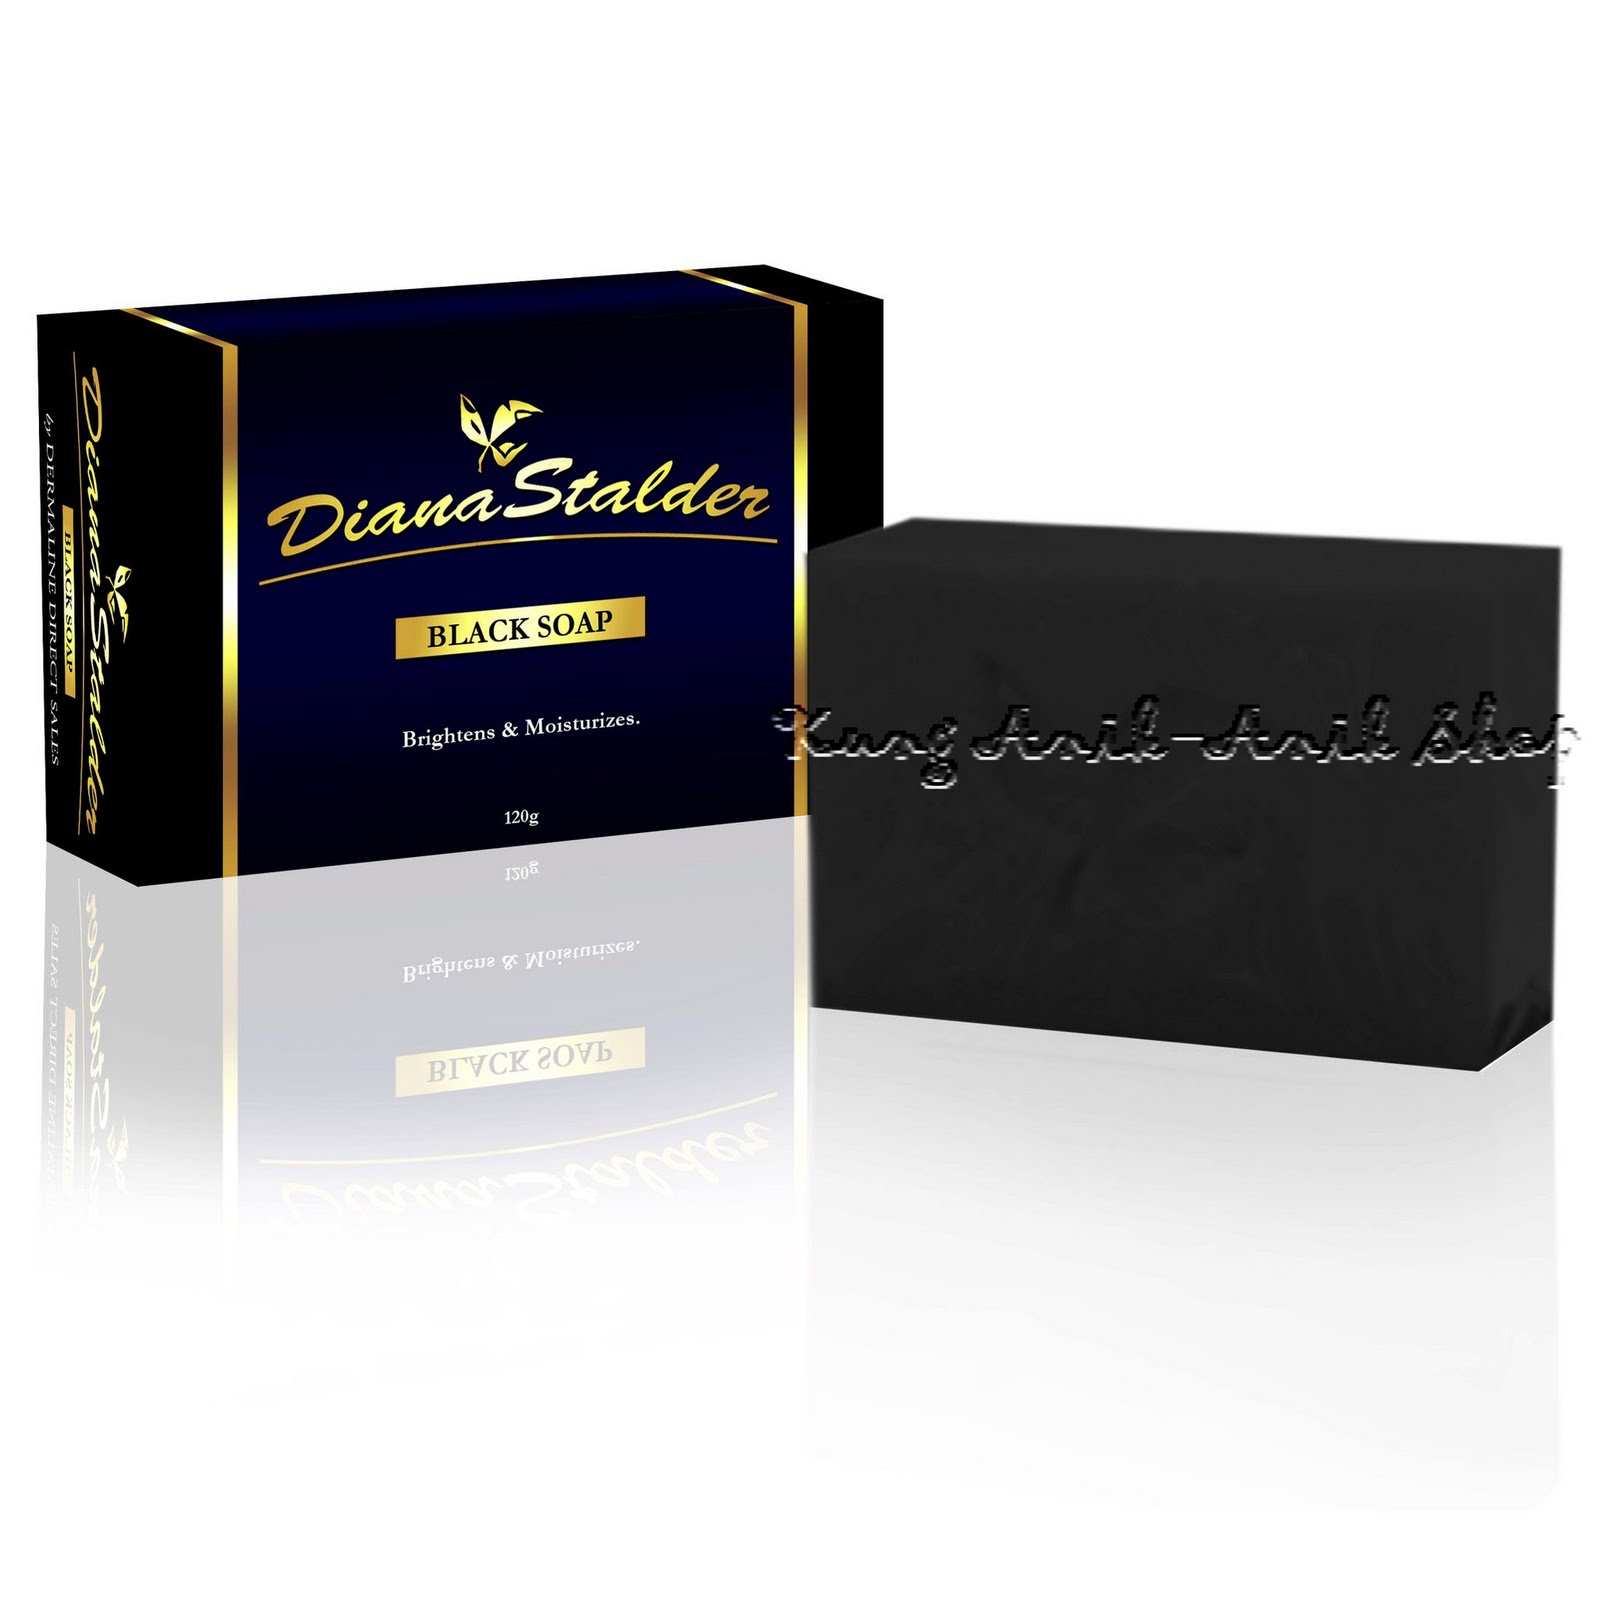  - Singapore: Diana Stalder offers the BEST whitening soaps this post is great for you know